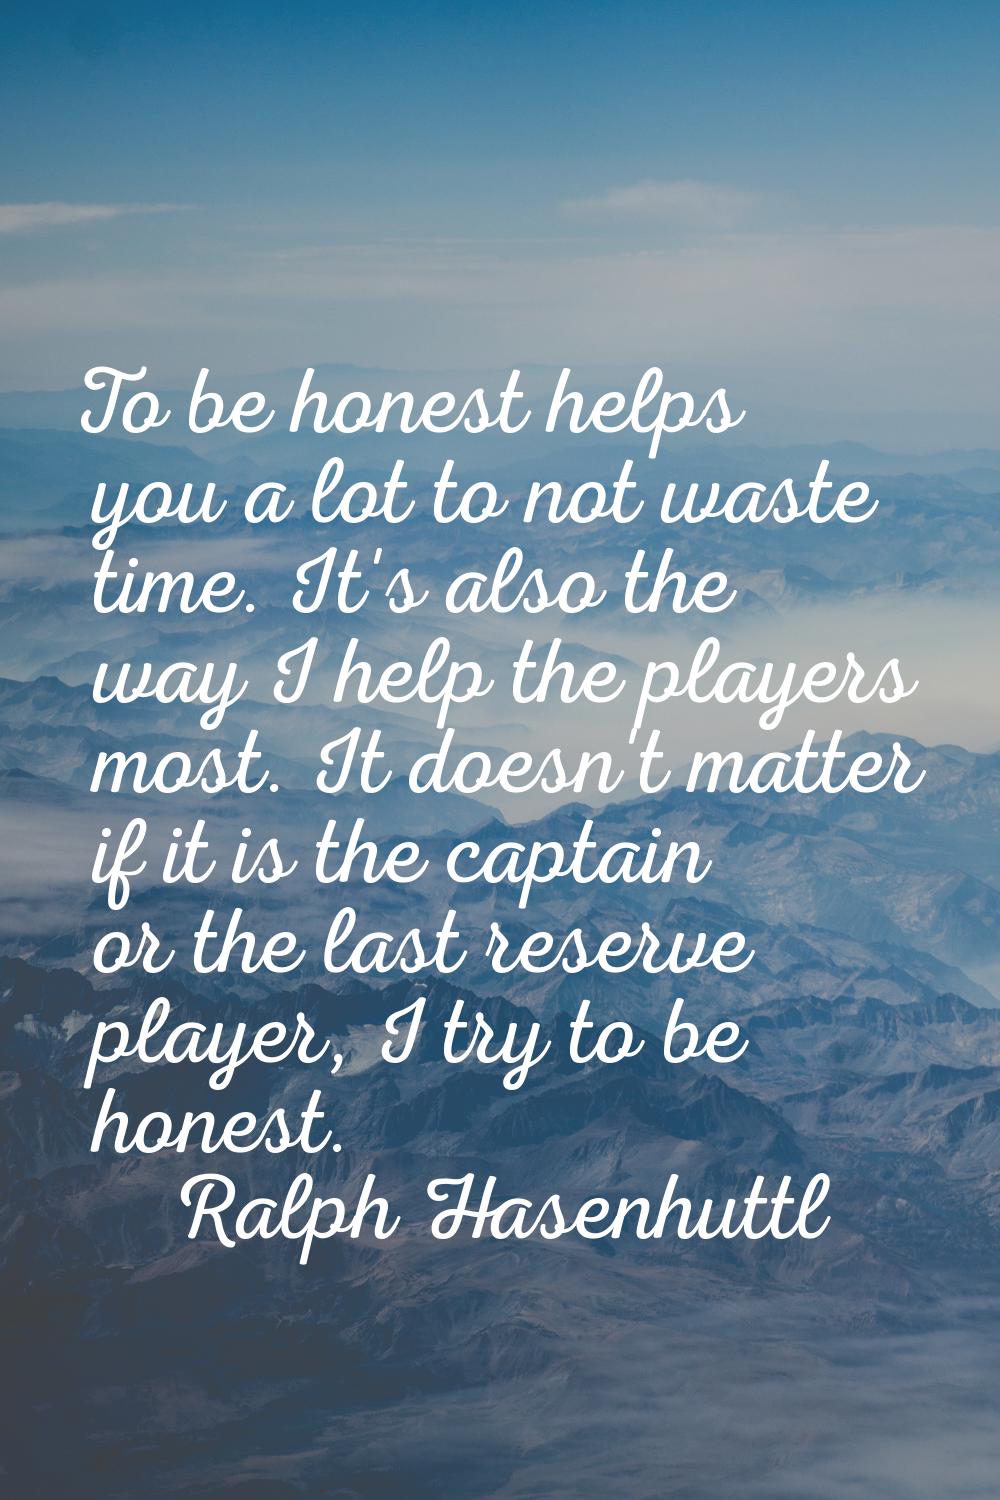 To be honest helps you a lot to not waste time. It's also the way I help the players most. It doesn